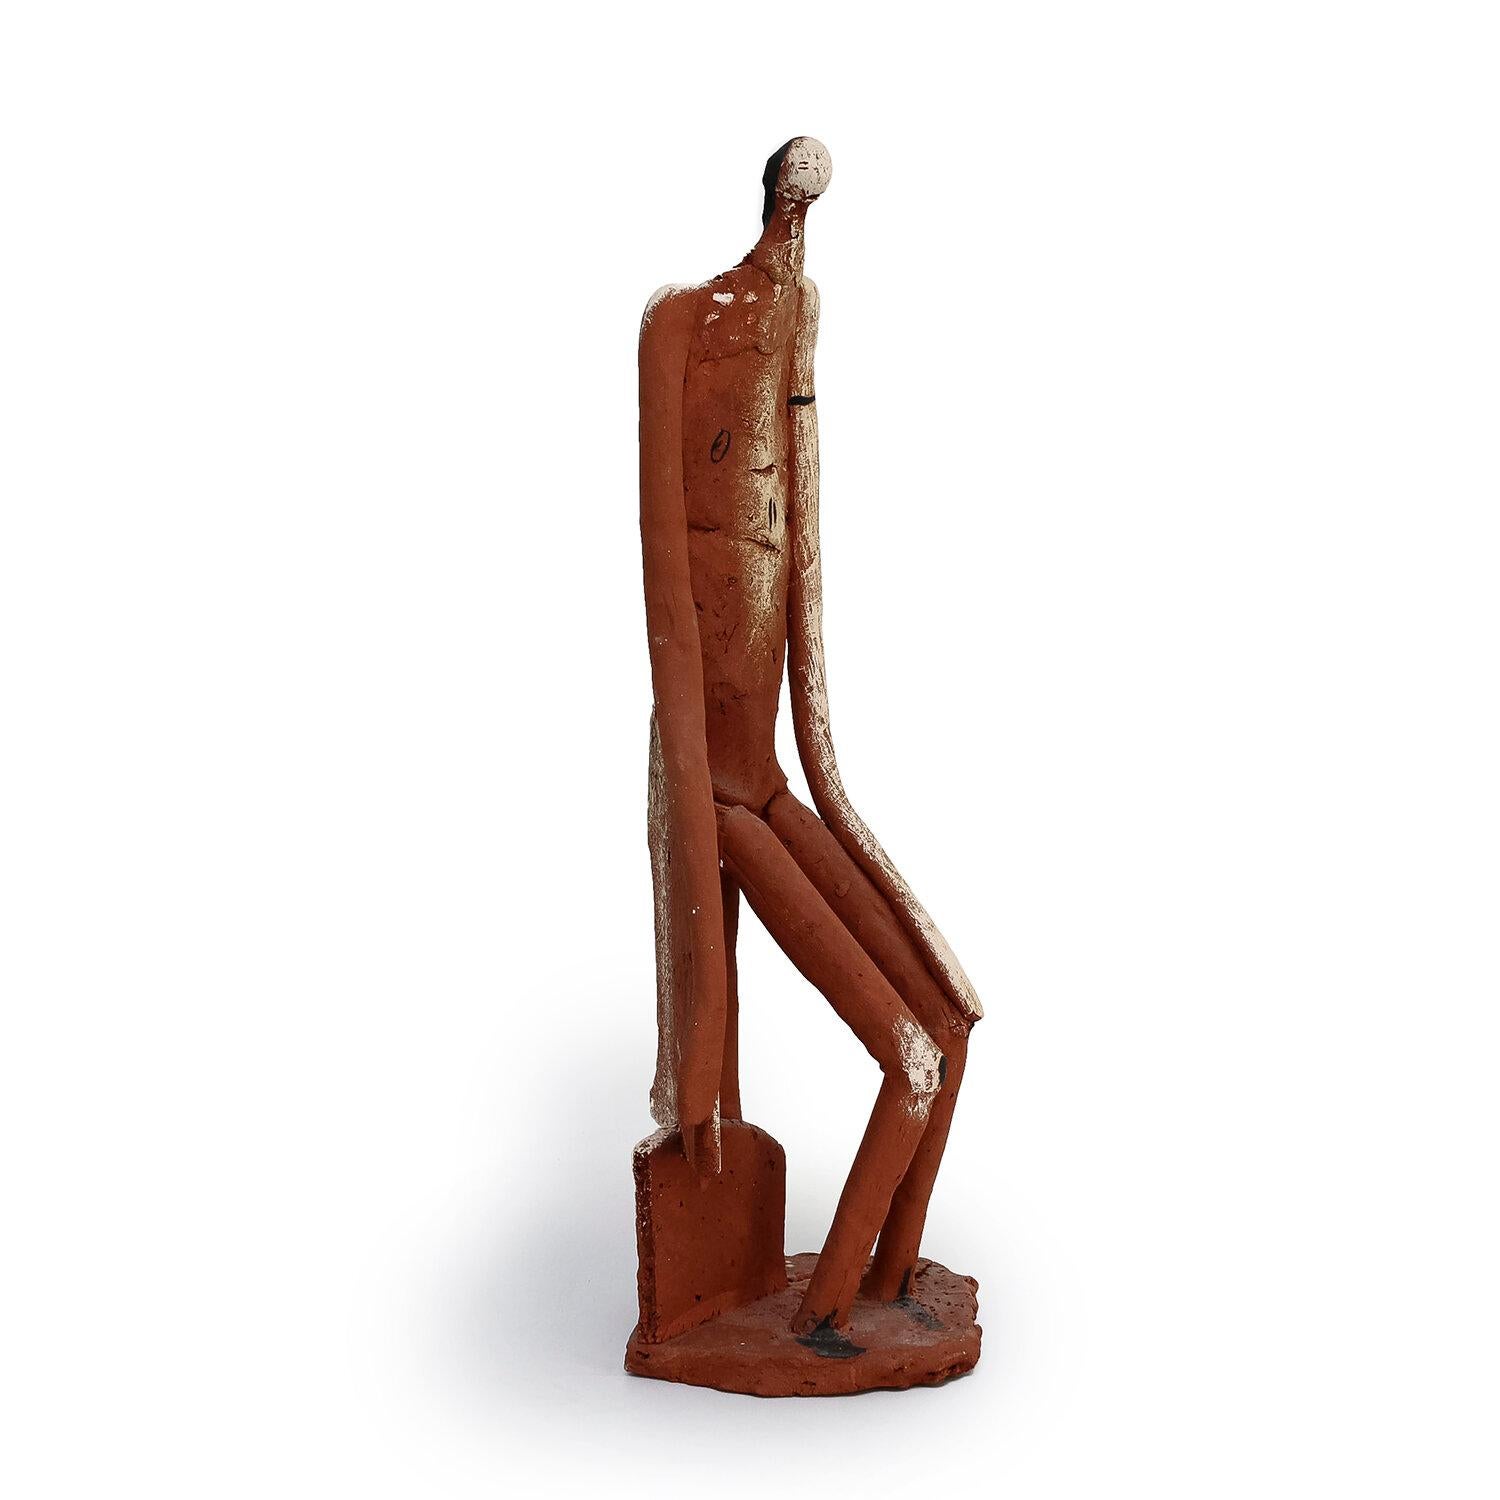 Untitled figure by Robert 